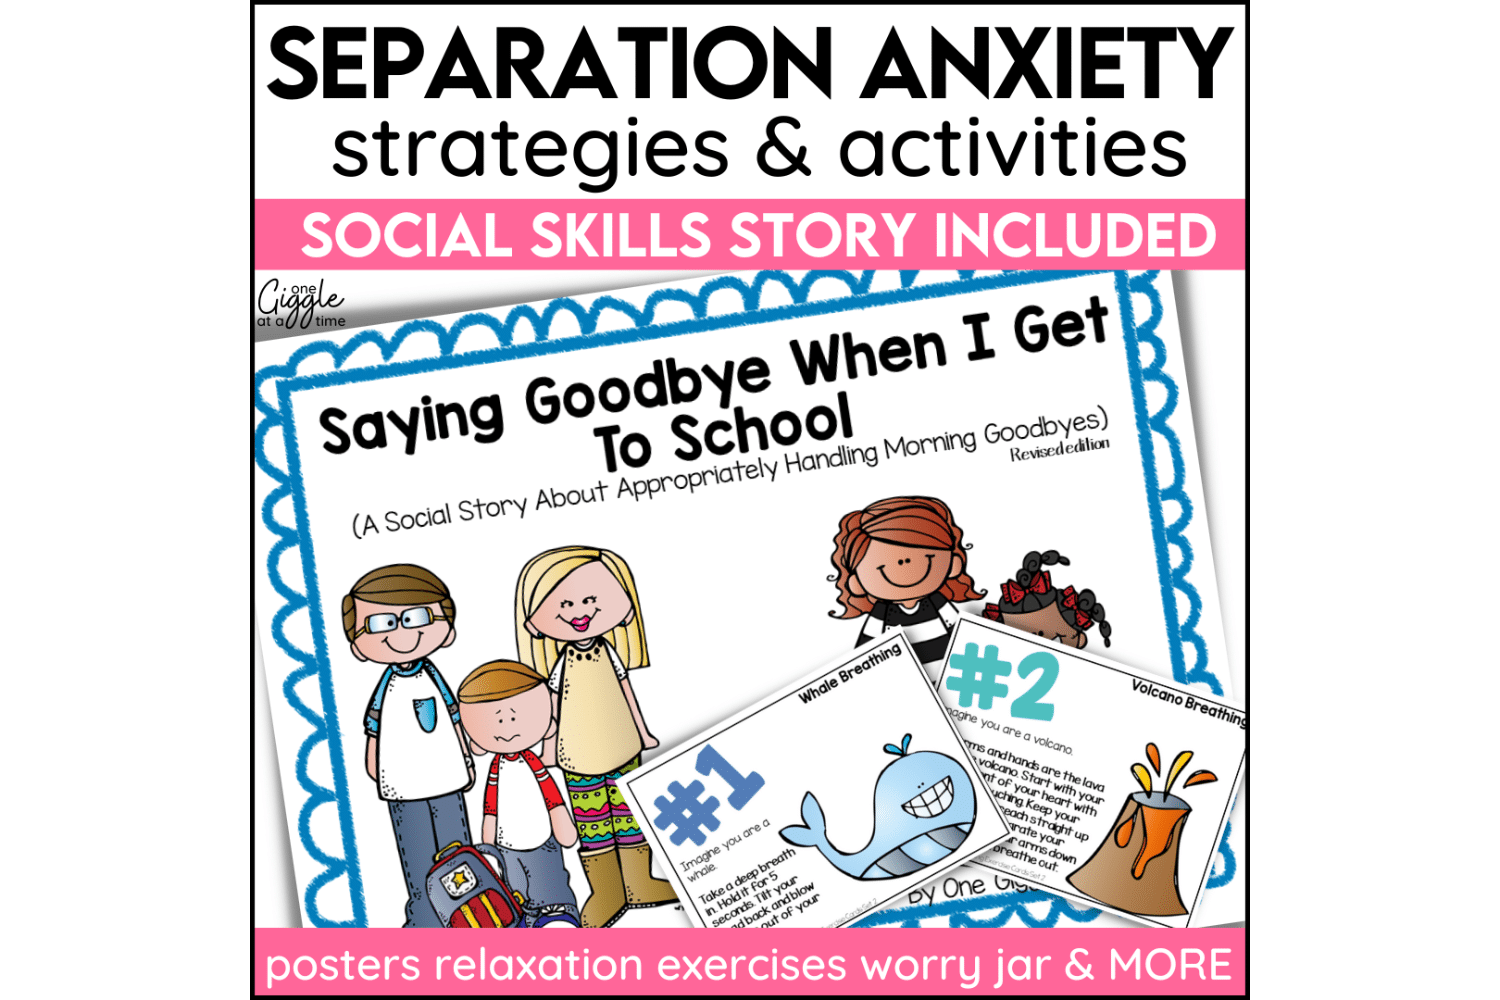 separation anxiety in children social skills story and activities